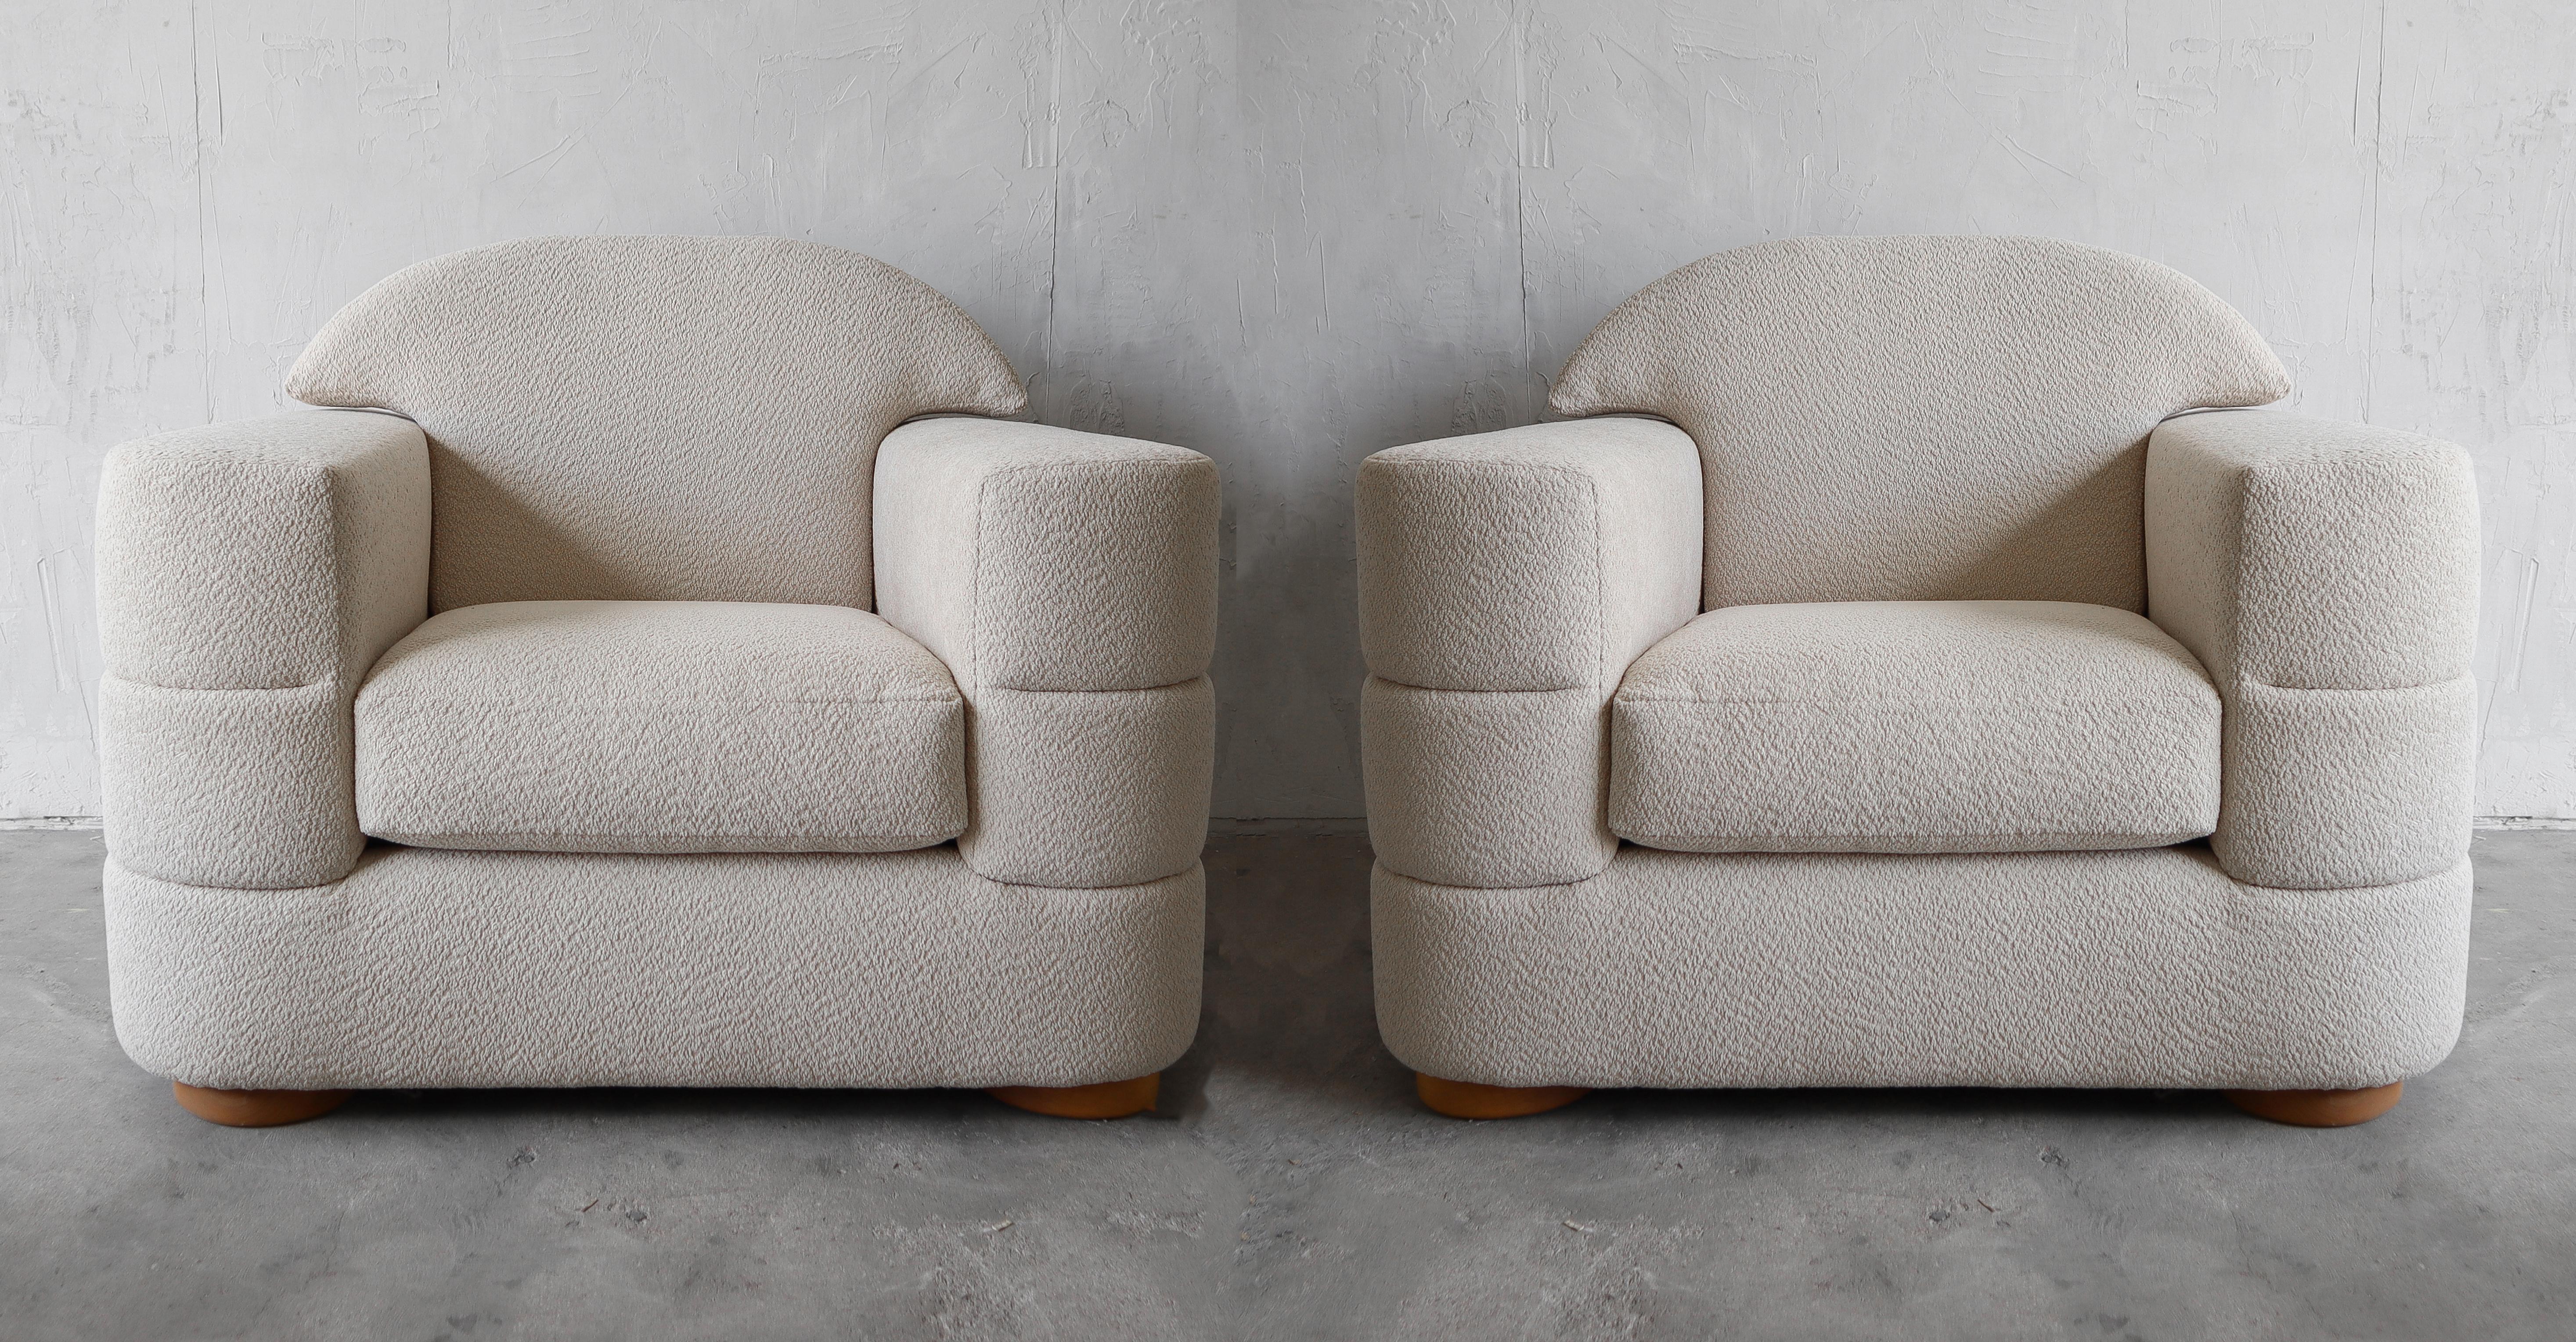 PICTURES DO THESE CHAIRS NO JUSTICE. This stunning pair of oversized channeled lounge chairs are perfect for a large space. Although large, the femininity of their shape adds to their appeal, the lines will really soften a space. The neutrality of